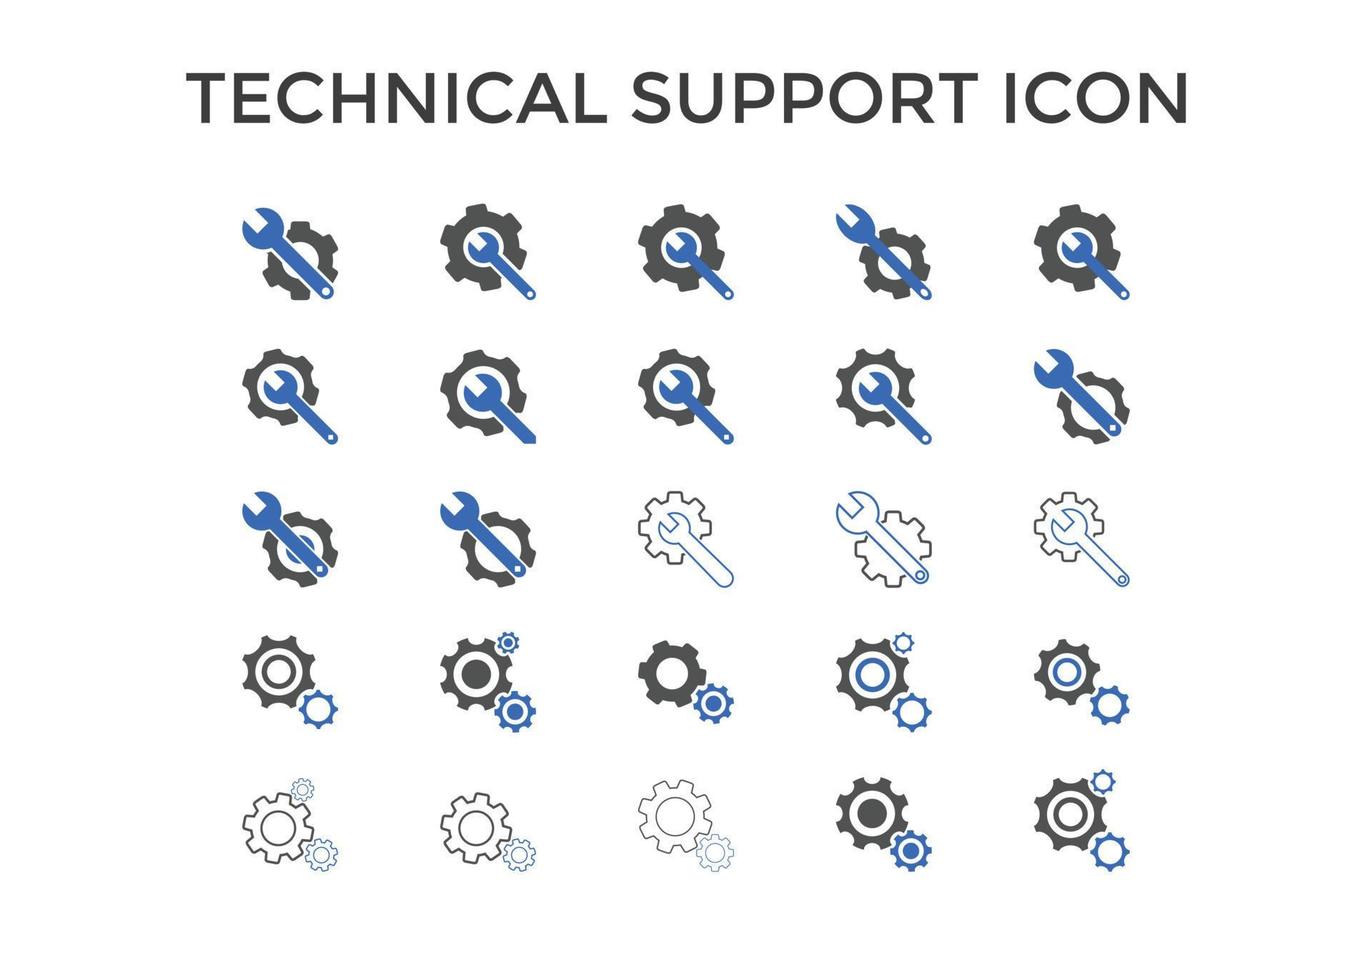 technical support icon Vector illustration. Tech support for SEO, Website and mobile apps